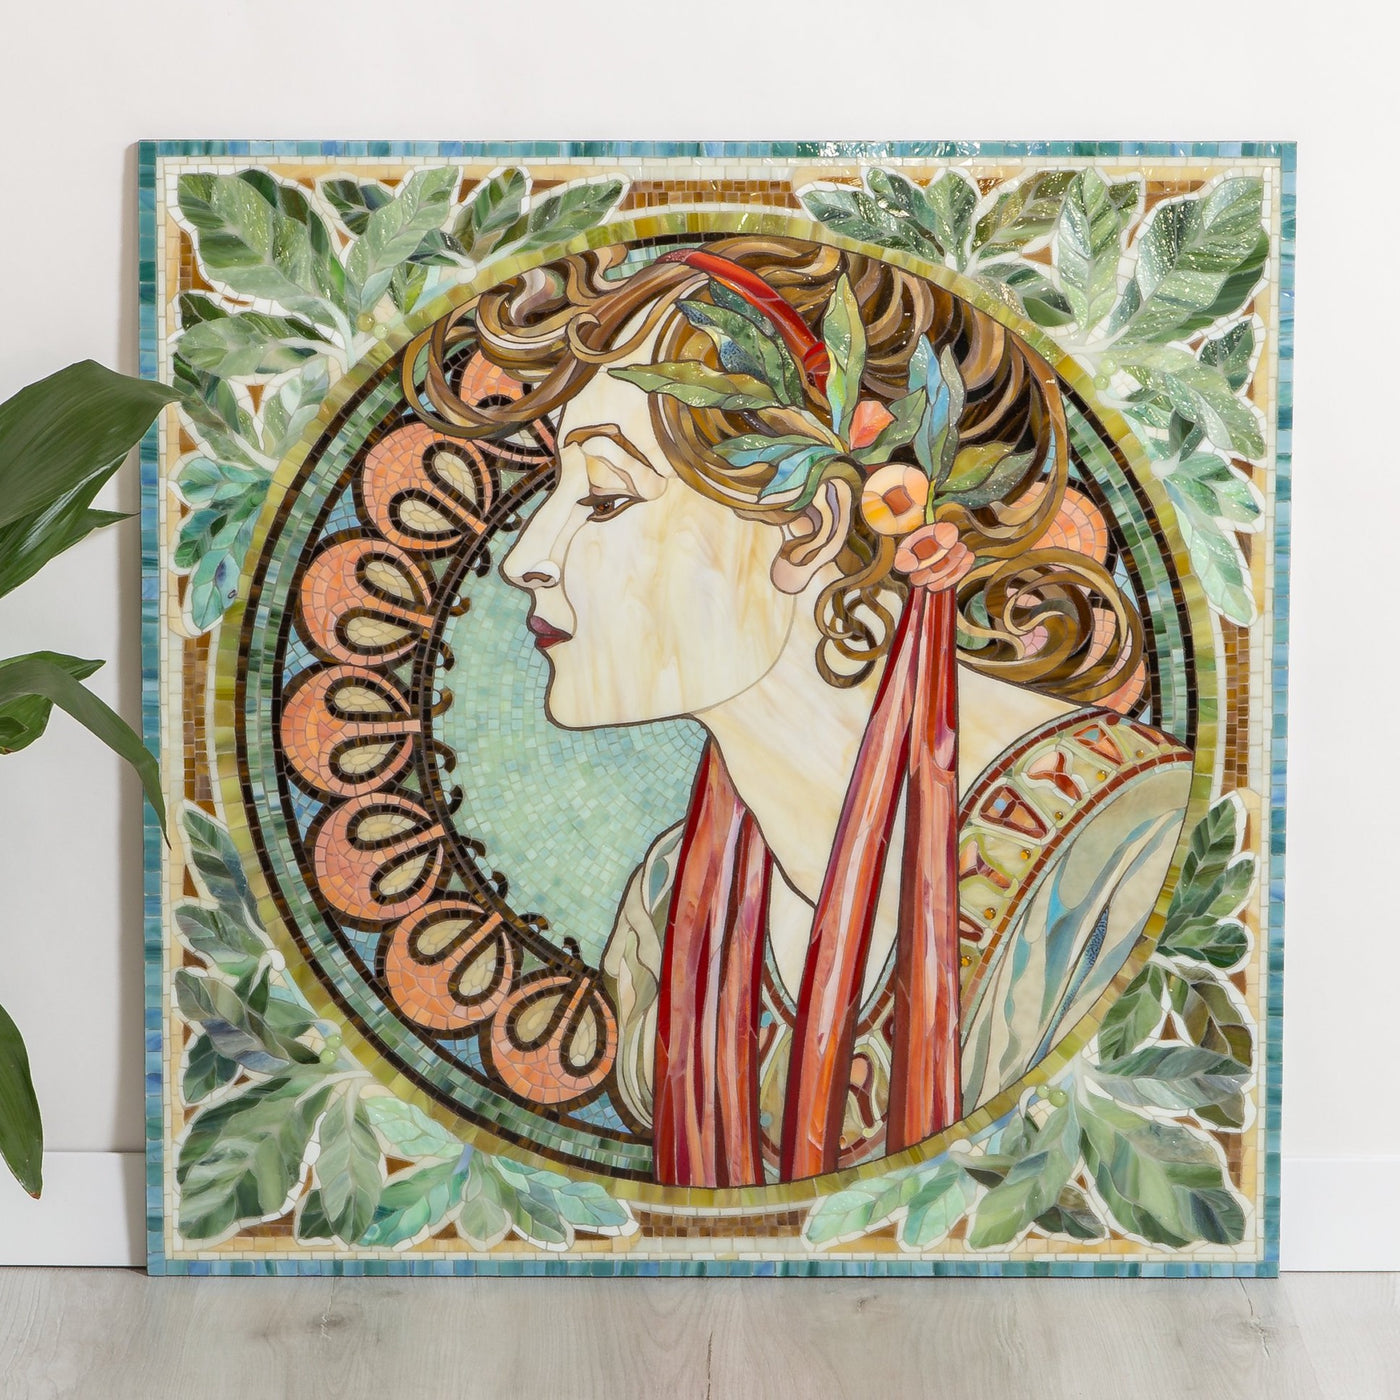 Stained glass mosaic depicting a woman in laurel leaves by Alphonse Mucha pattern